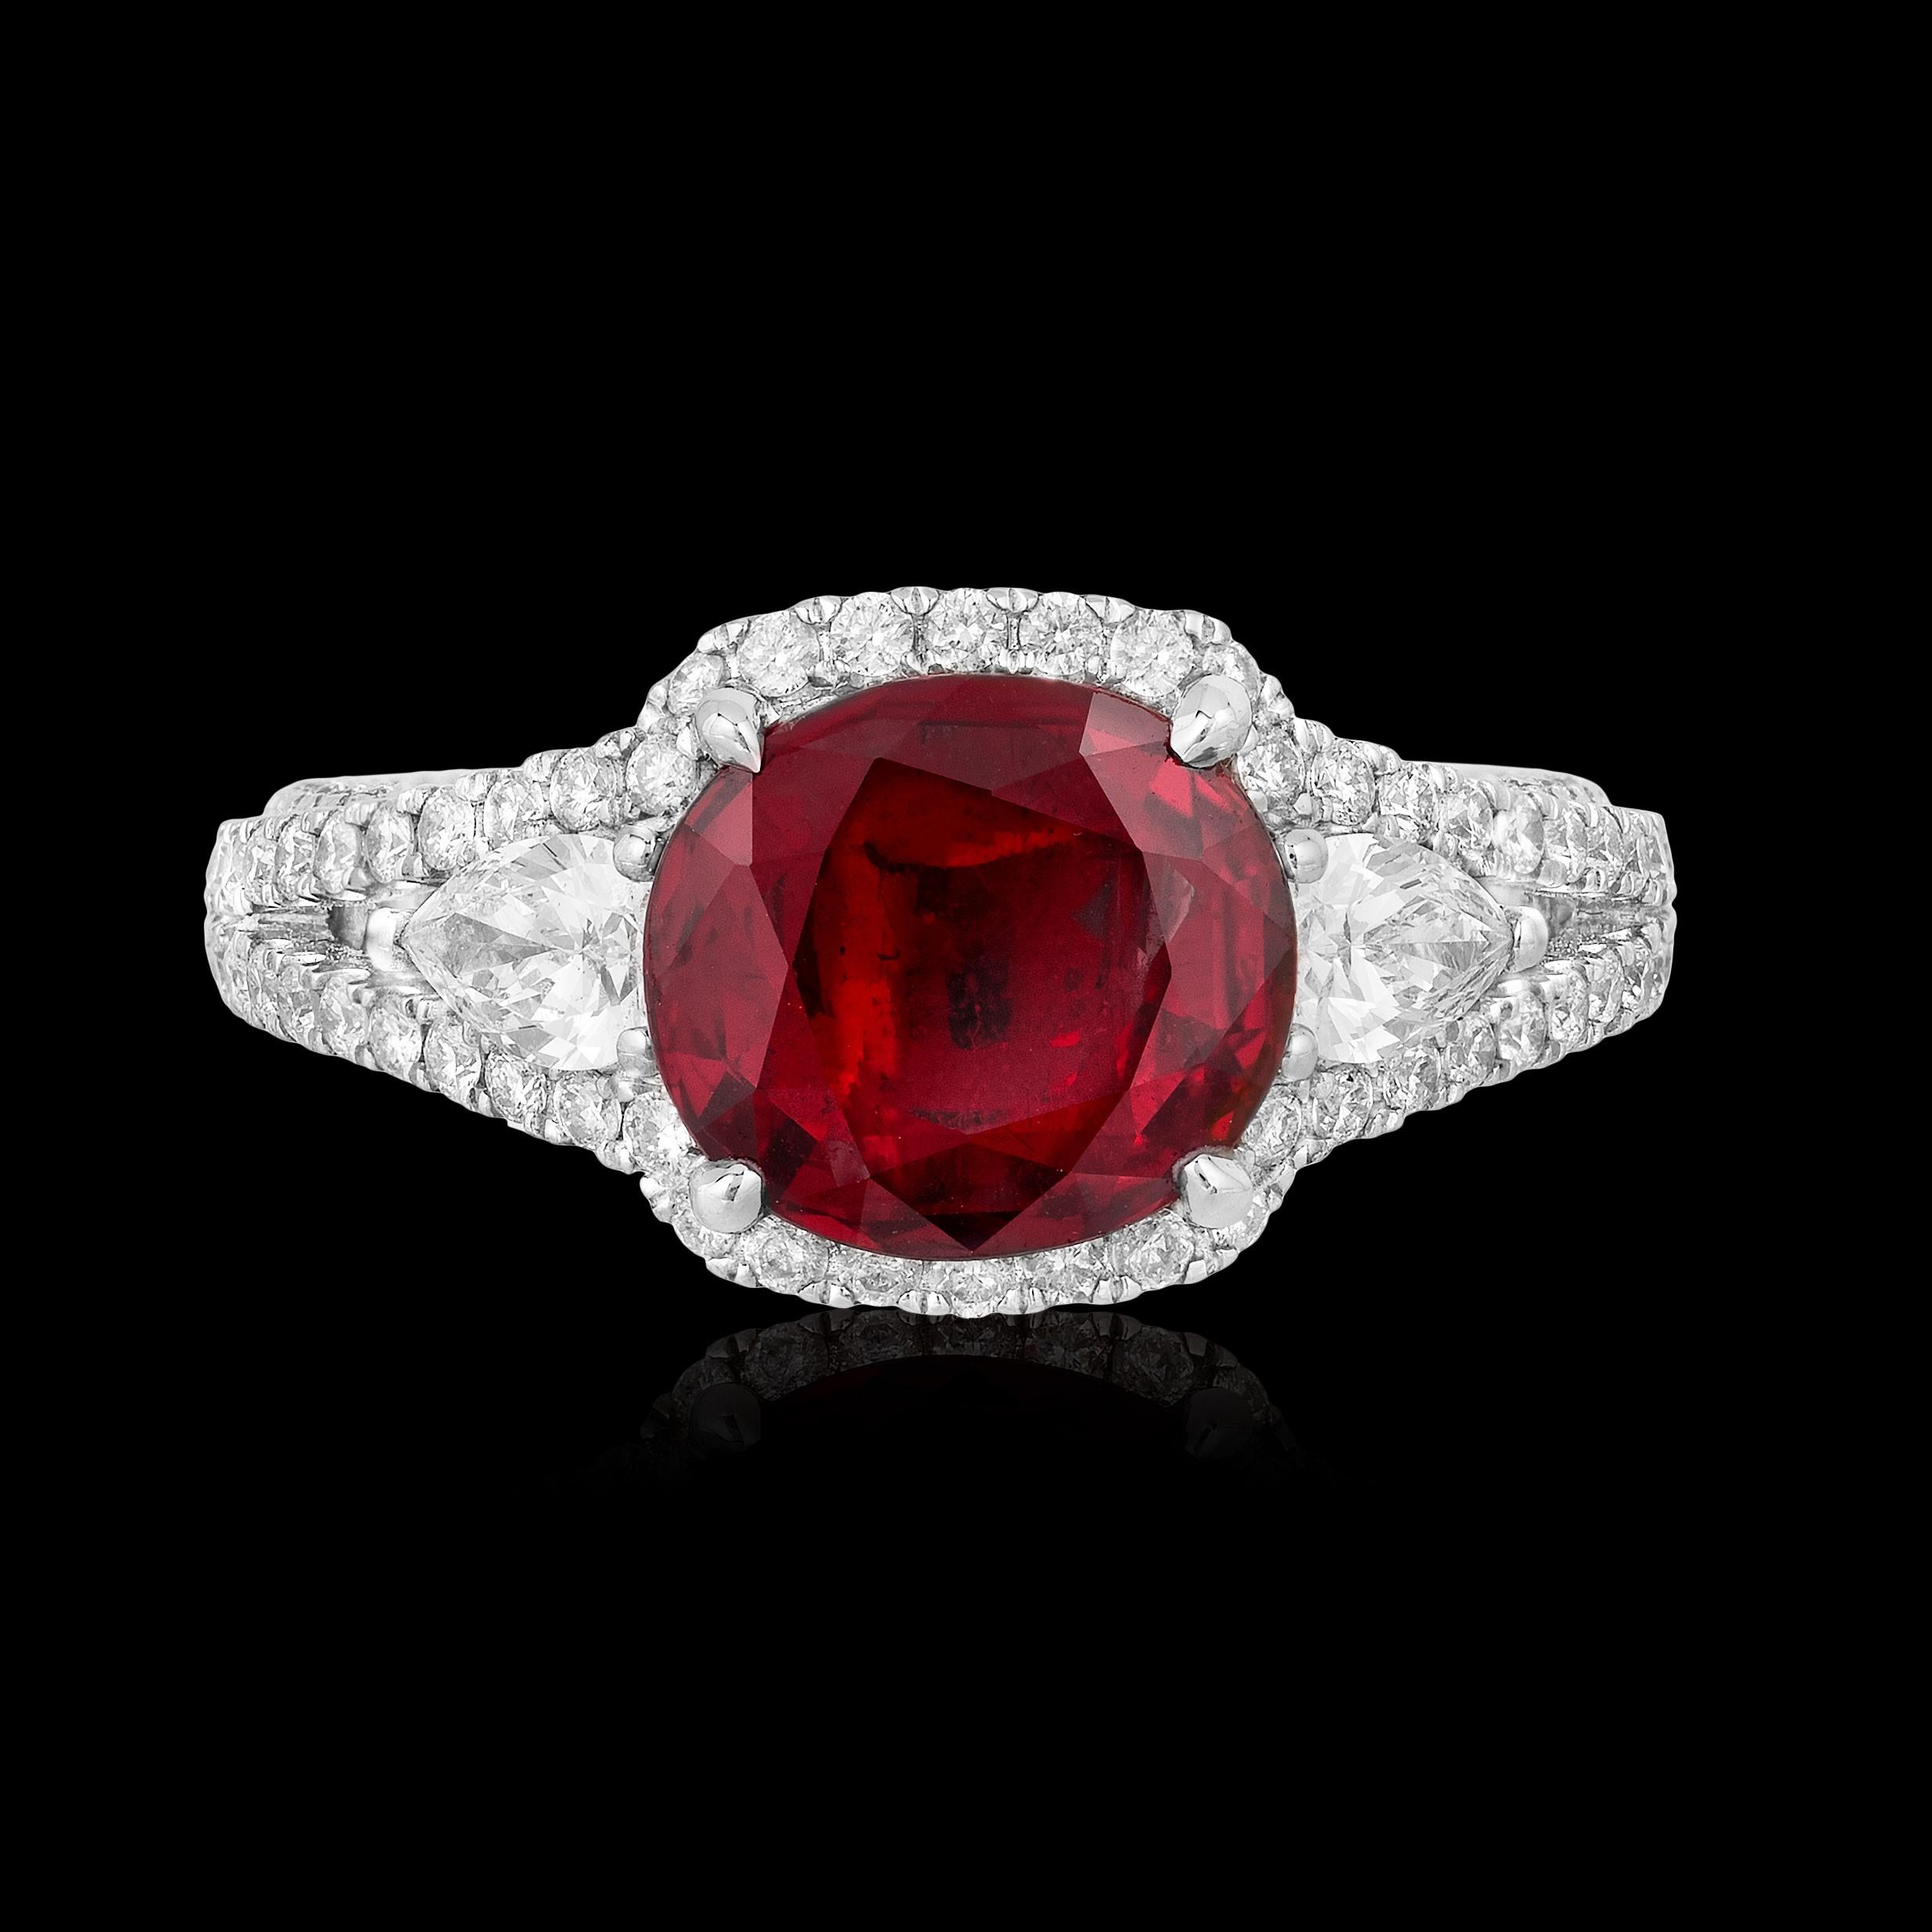 Andreoli GIA Certified 1.98 Carat Pigeon Blood Ruby Thailand Diamond Ring

This ring features a GIA Certified 1.98 Carat Pigeon Blood Thailand Origin Ruby. Accented with two near colourless pear shape, 0.41 carat, brilliant cut diamonds and numerous